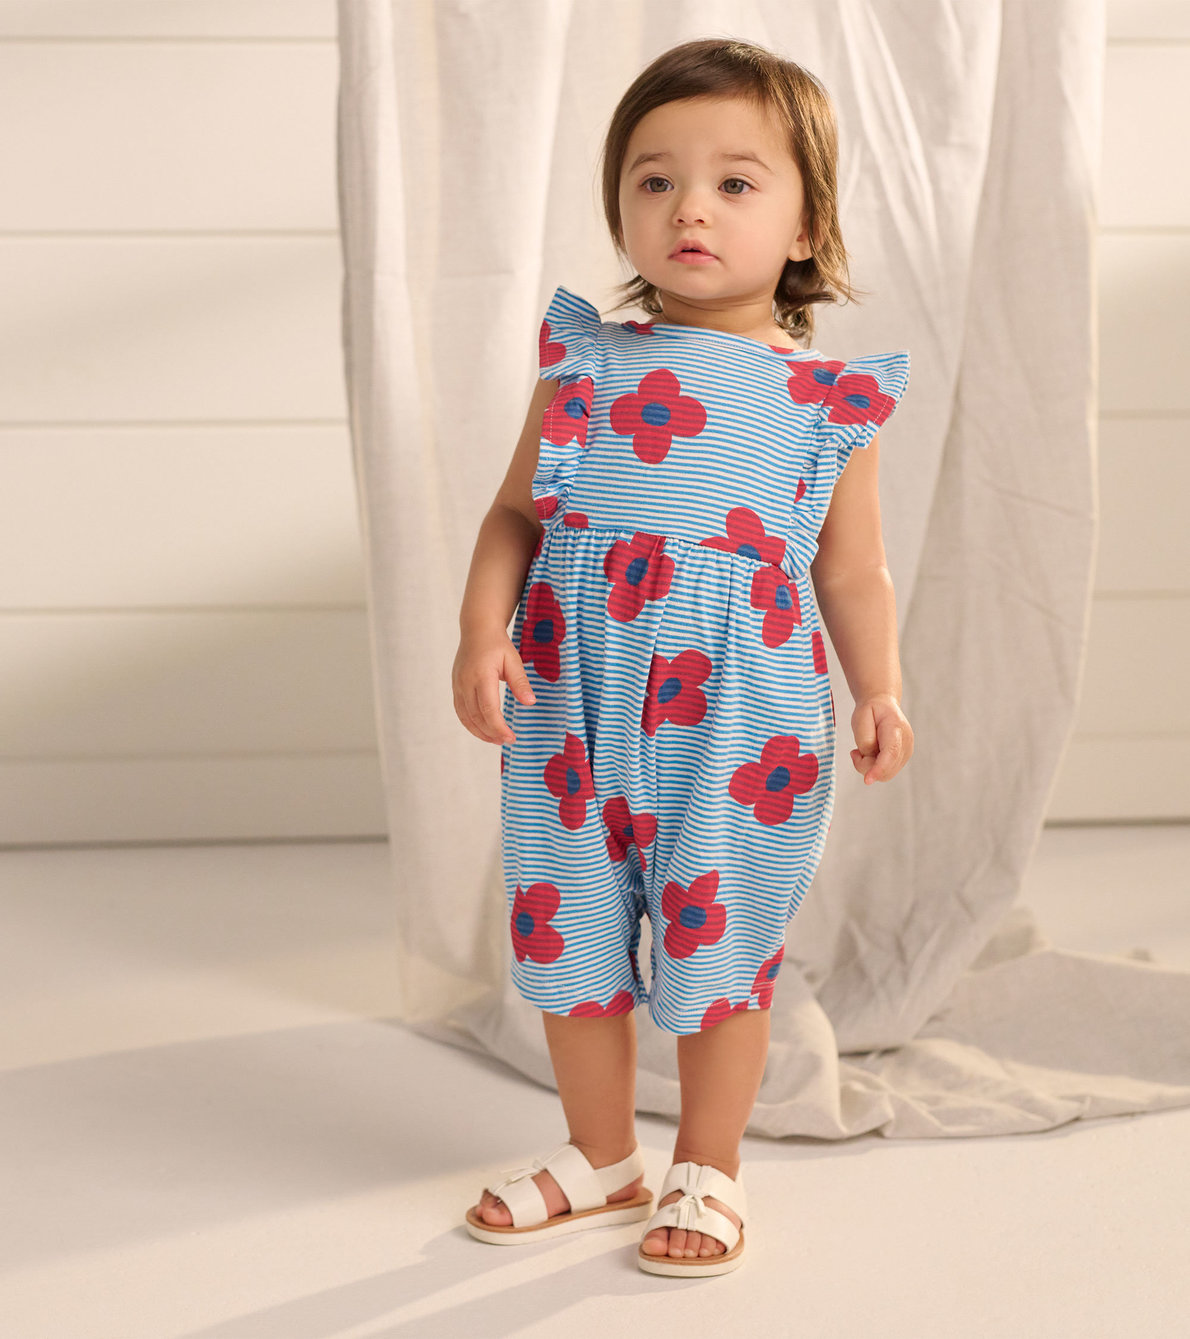 View larger image of Spring Flowers Ruffle Romper